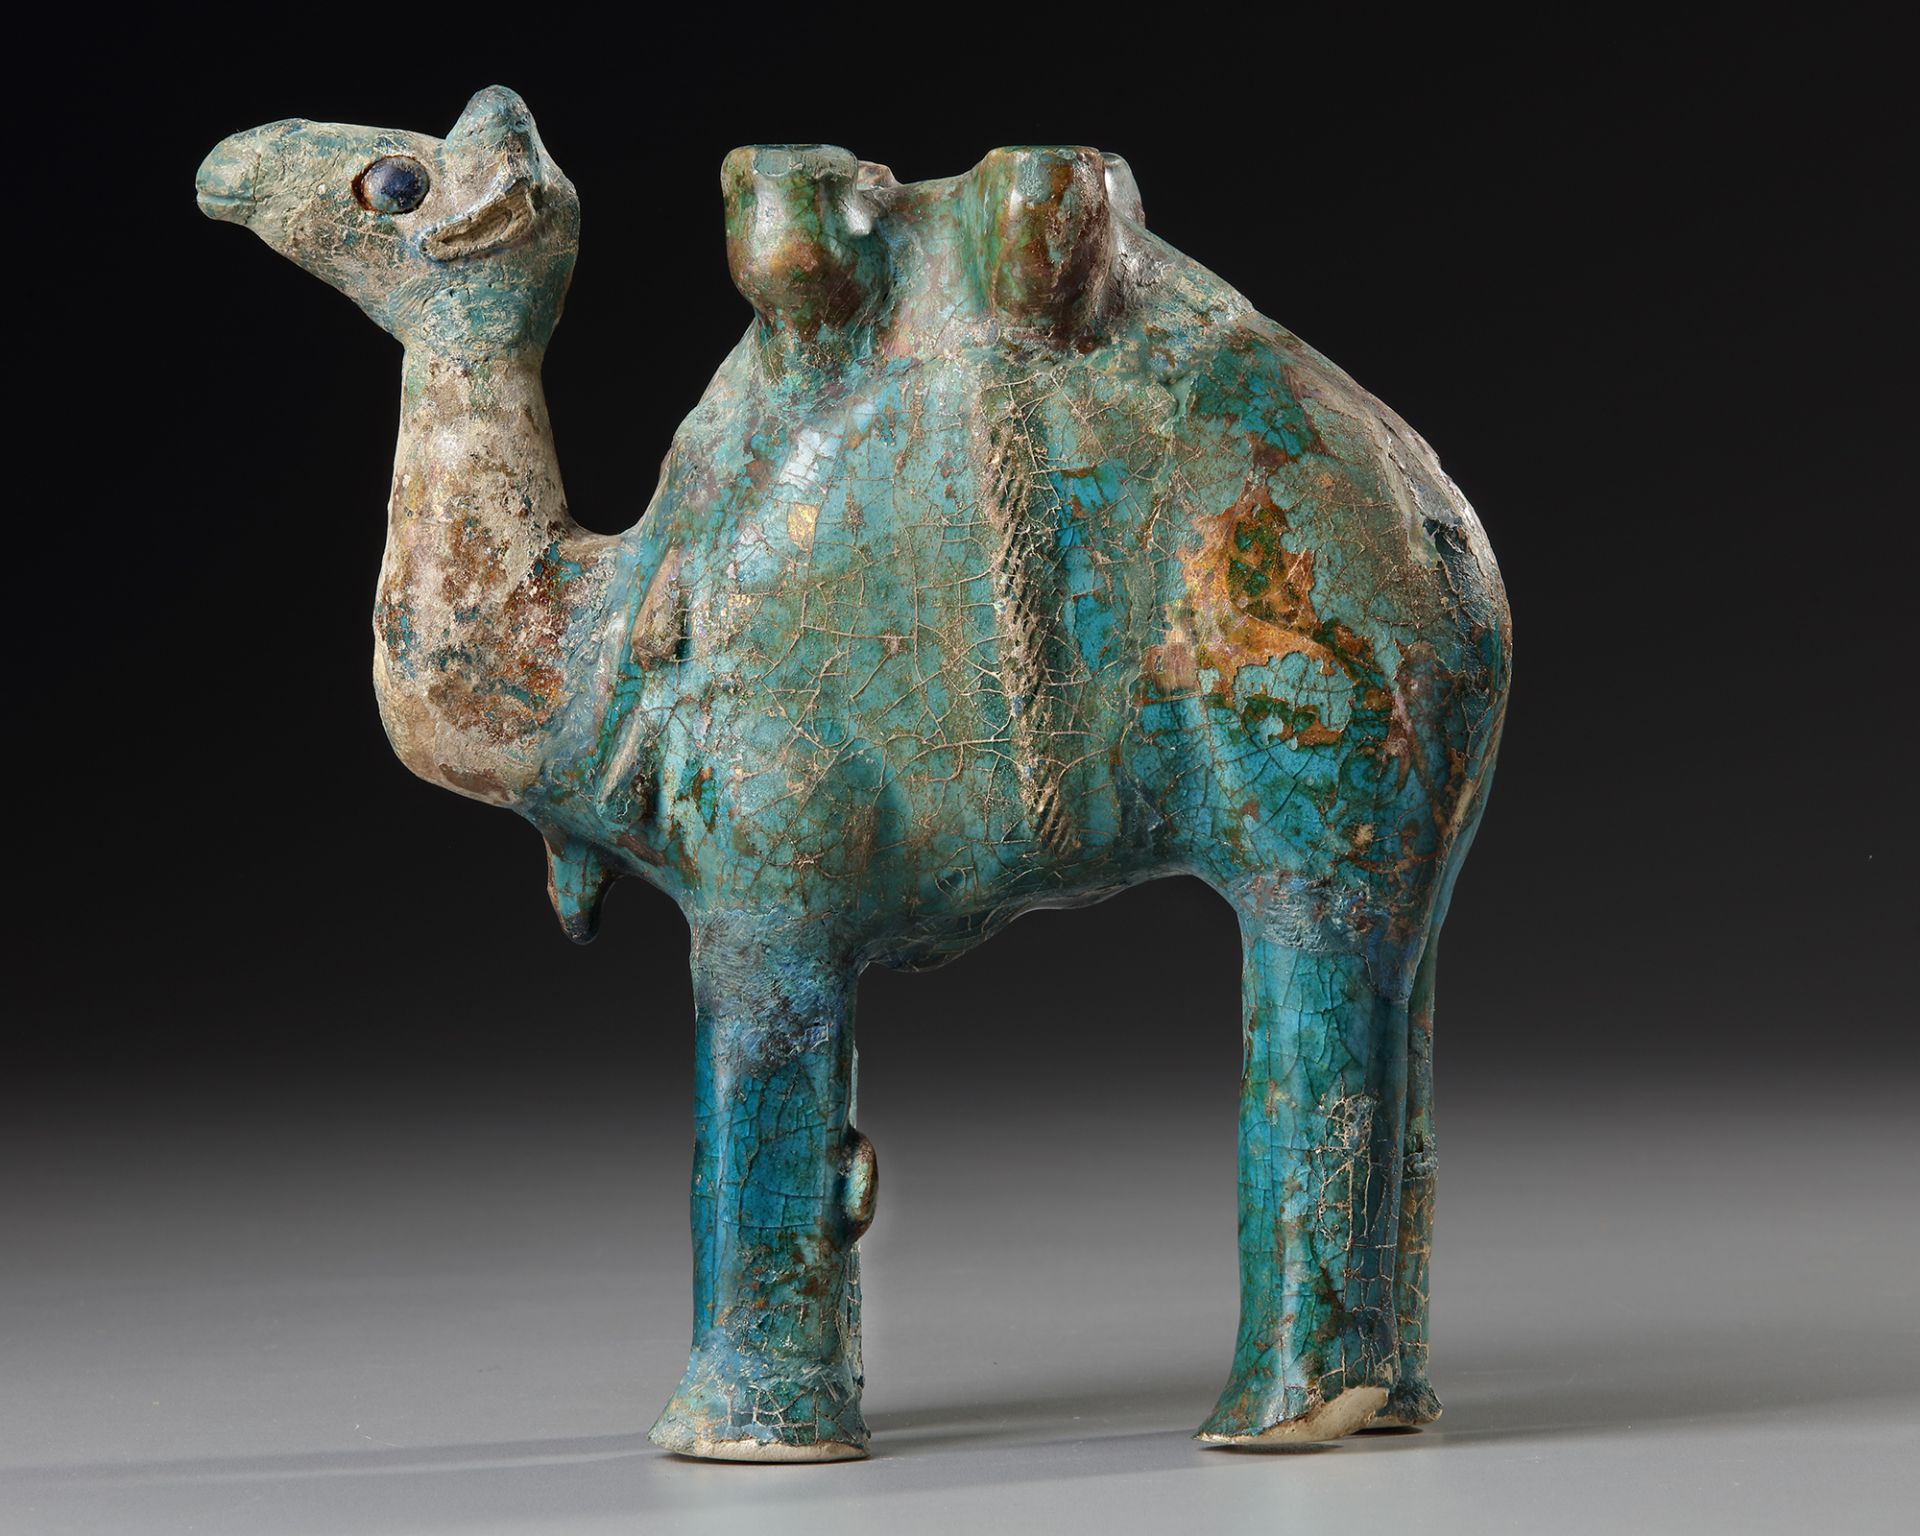 A TURQUOISE GLAZED POTTERY FIGURE OF A CAMEL, KASHAN, PERSIA, 11TH-12TH CENTURY - Image 3 of 8